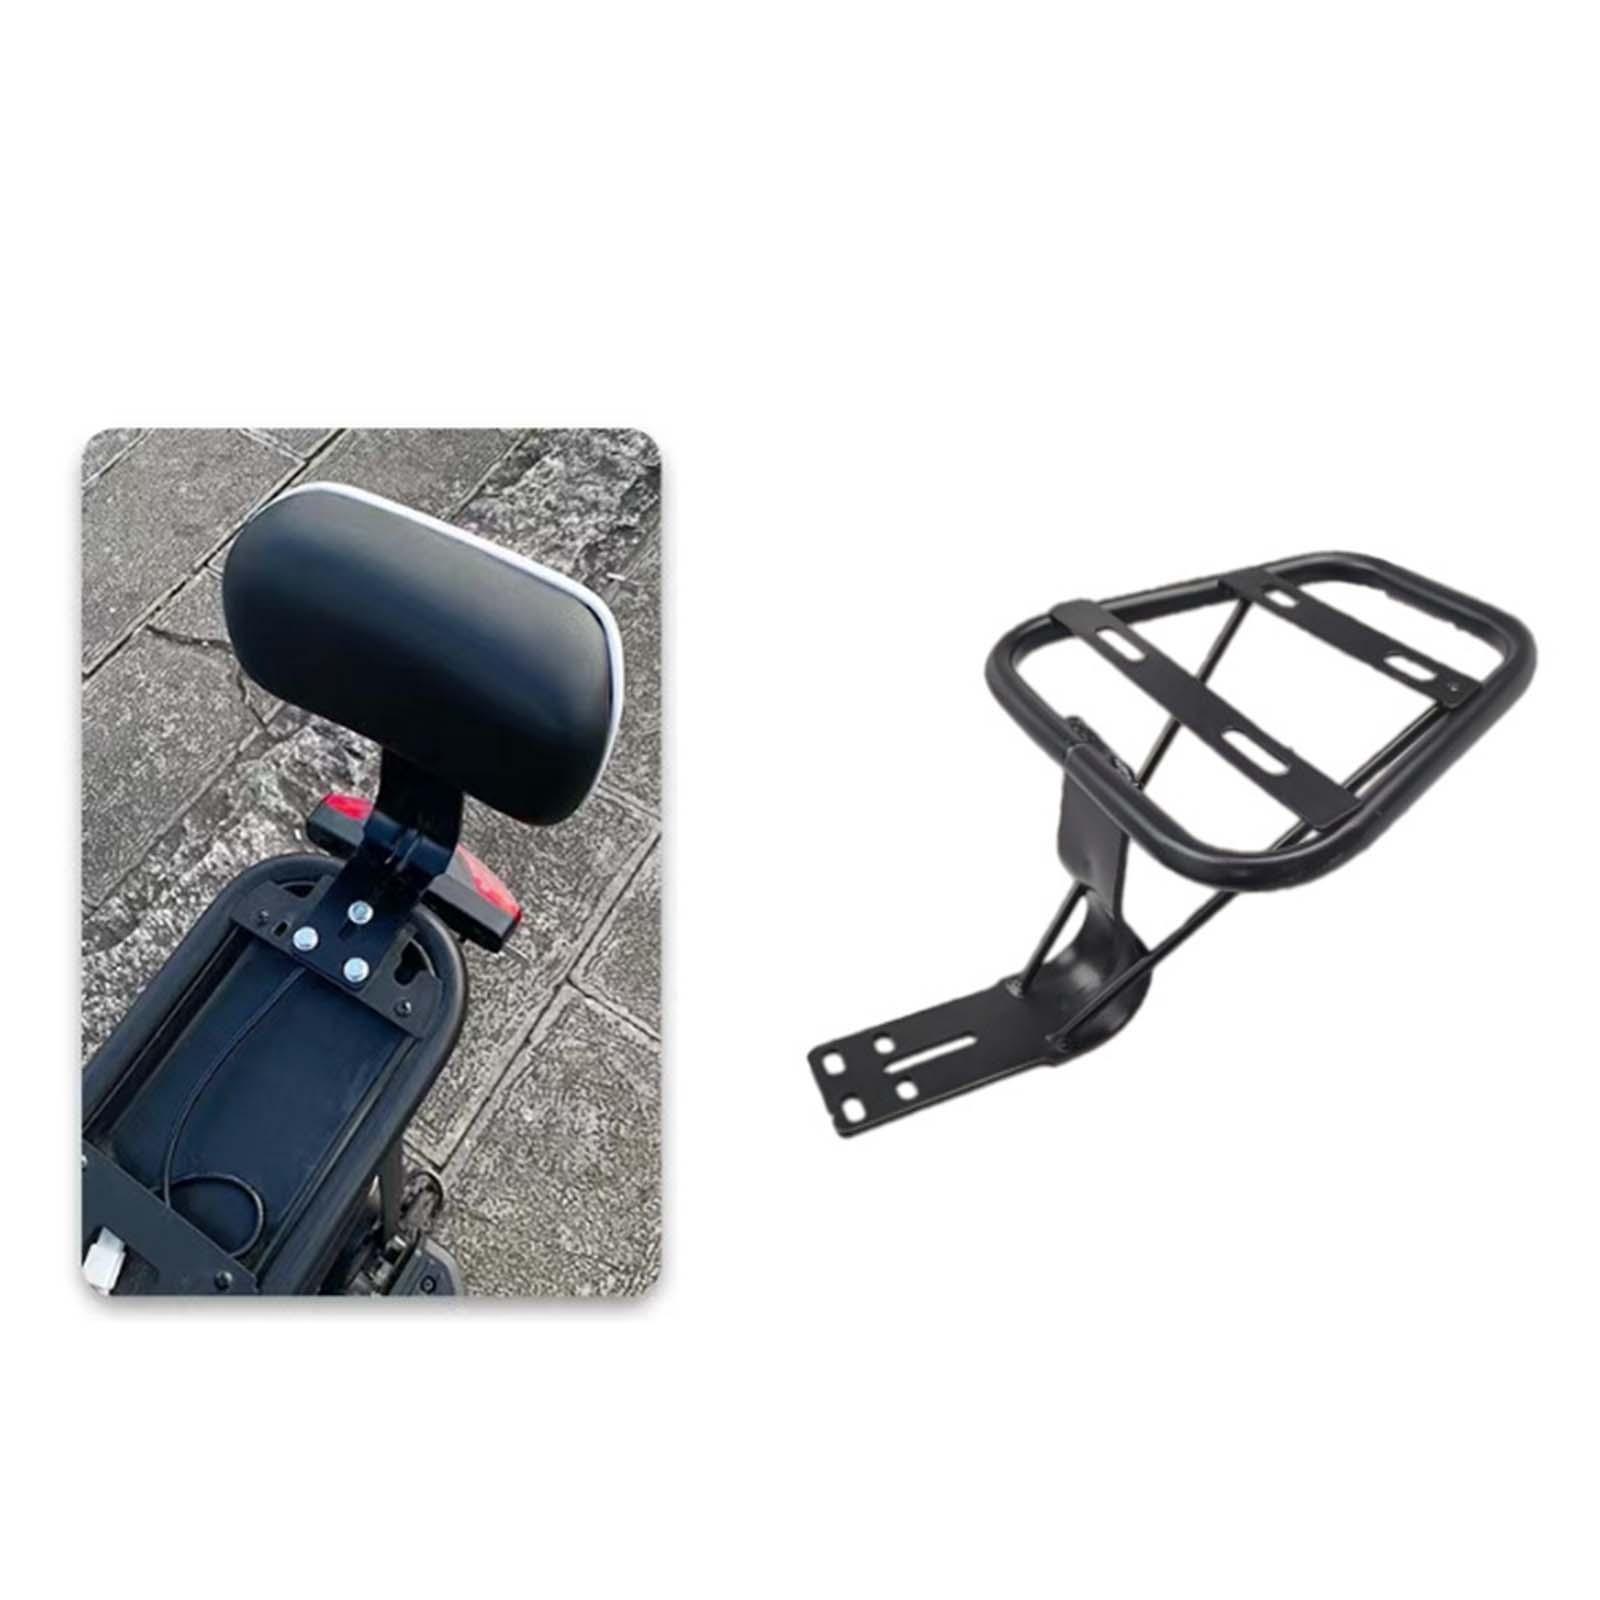 Motorcycle Rear Luggage Holder Support Replace Fittings Durable Shelf Waterproof Metal Easy to Install Backrest Storage Box Rack Basket Rack